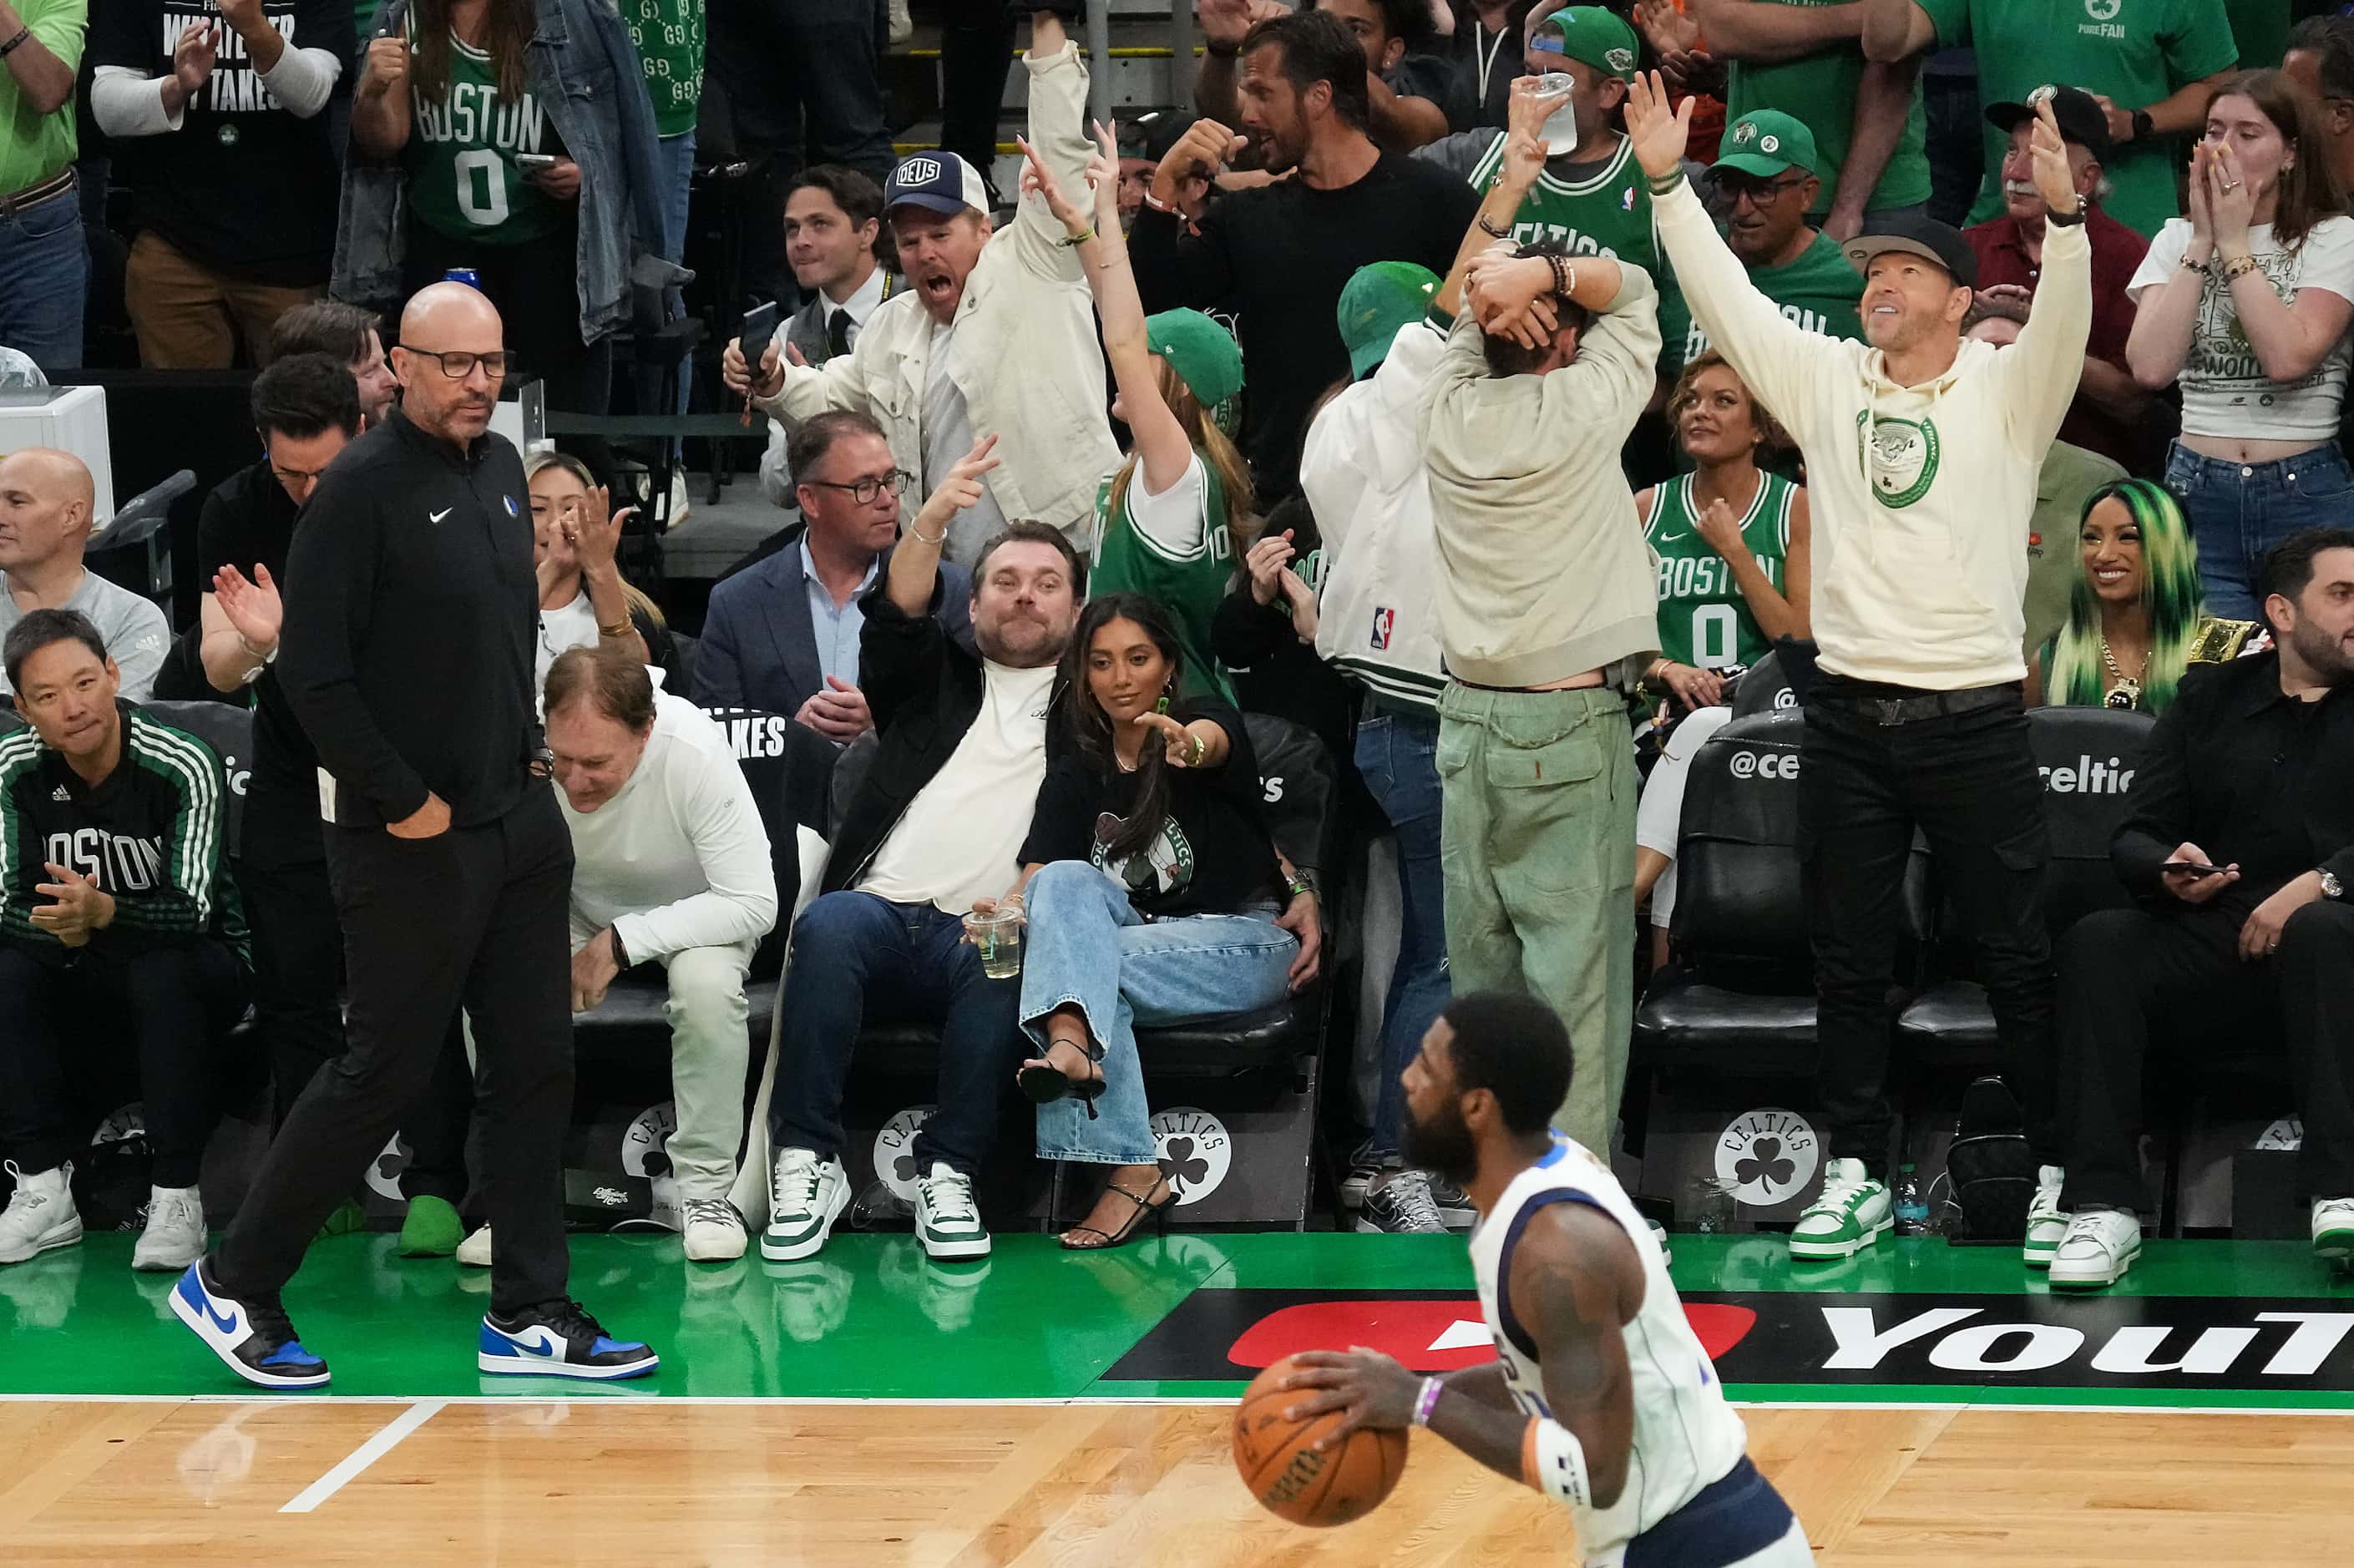 Boston Celtics fan, including actor Donnie Wahlberg (right) celebrate a basket as Dallas...